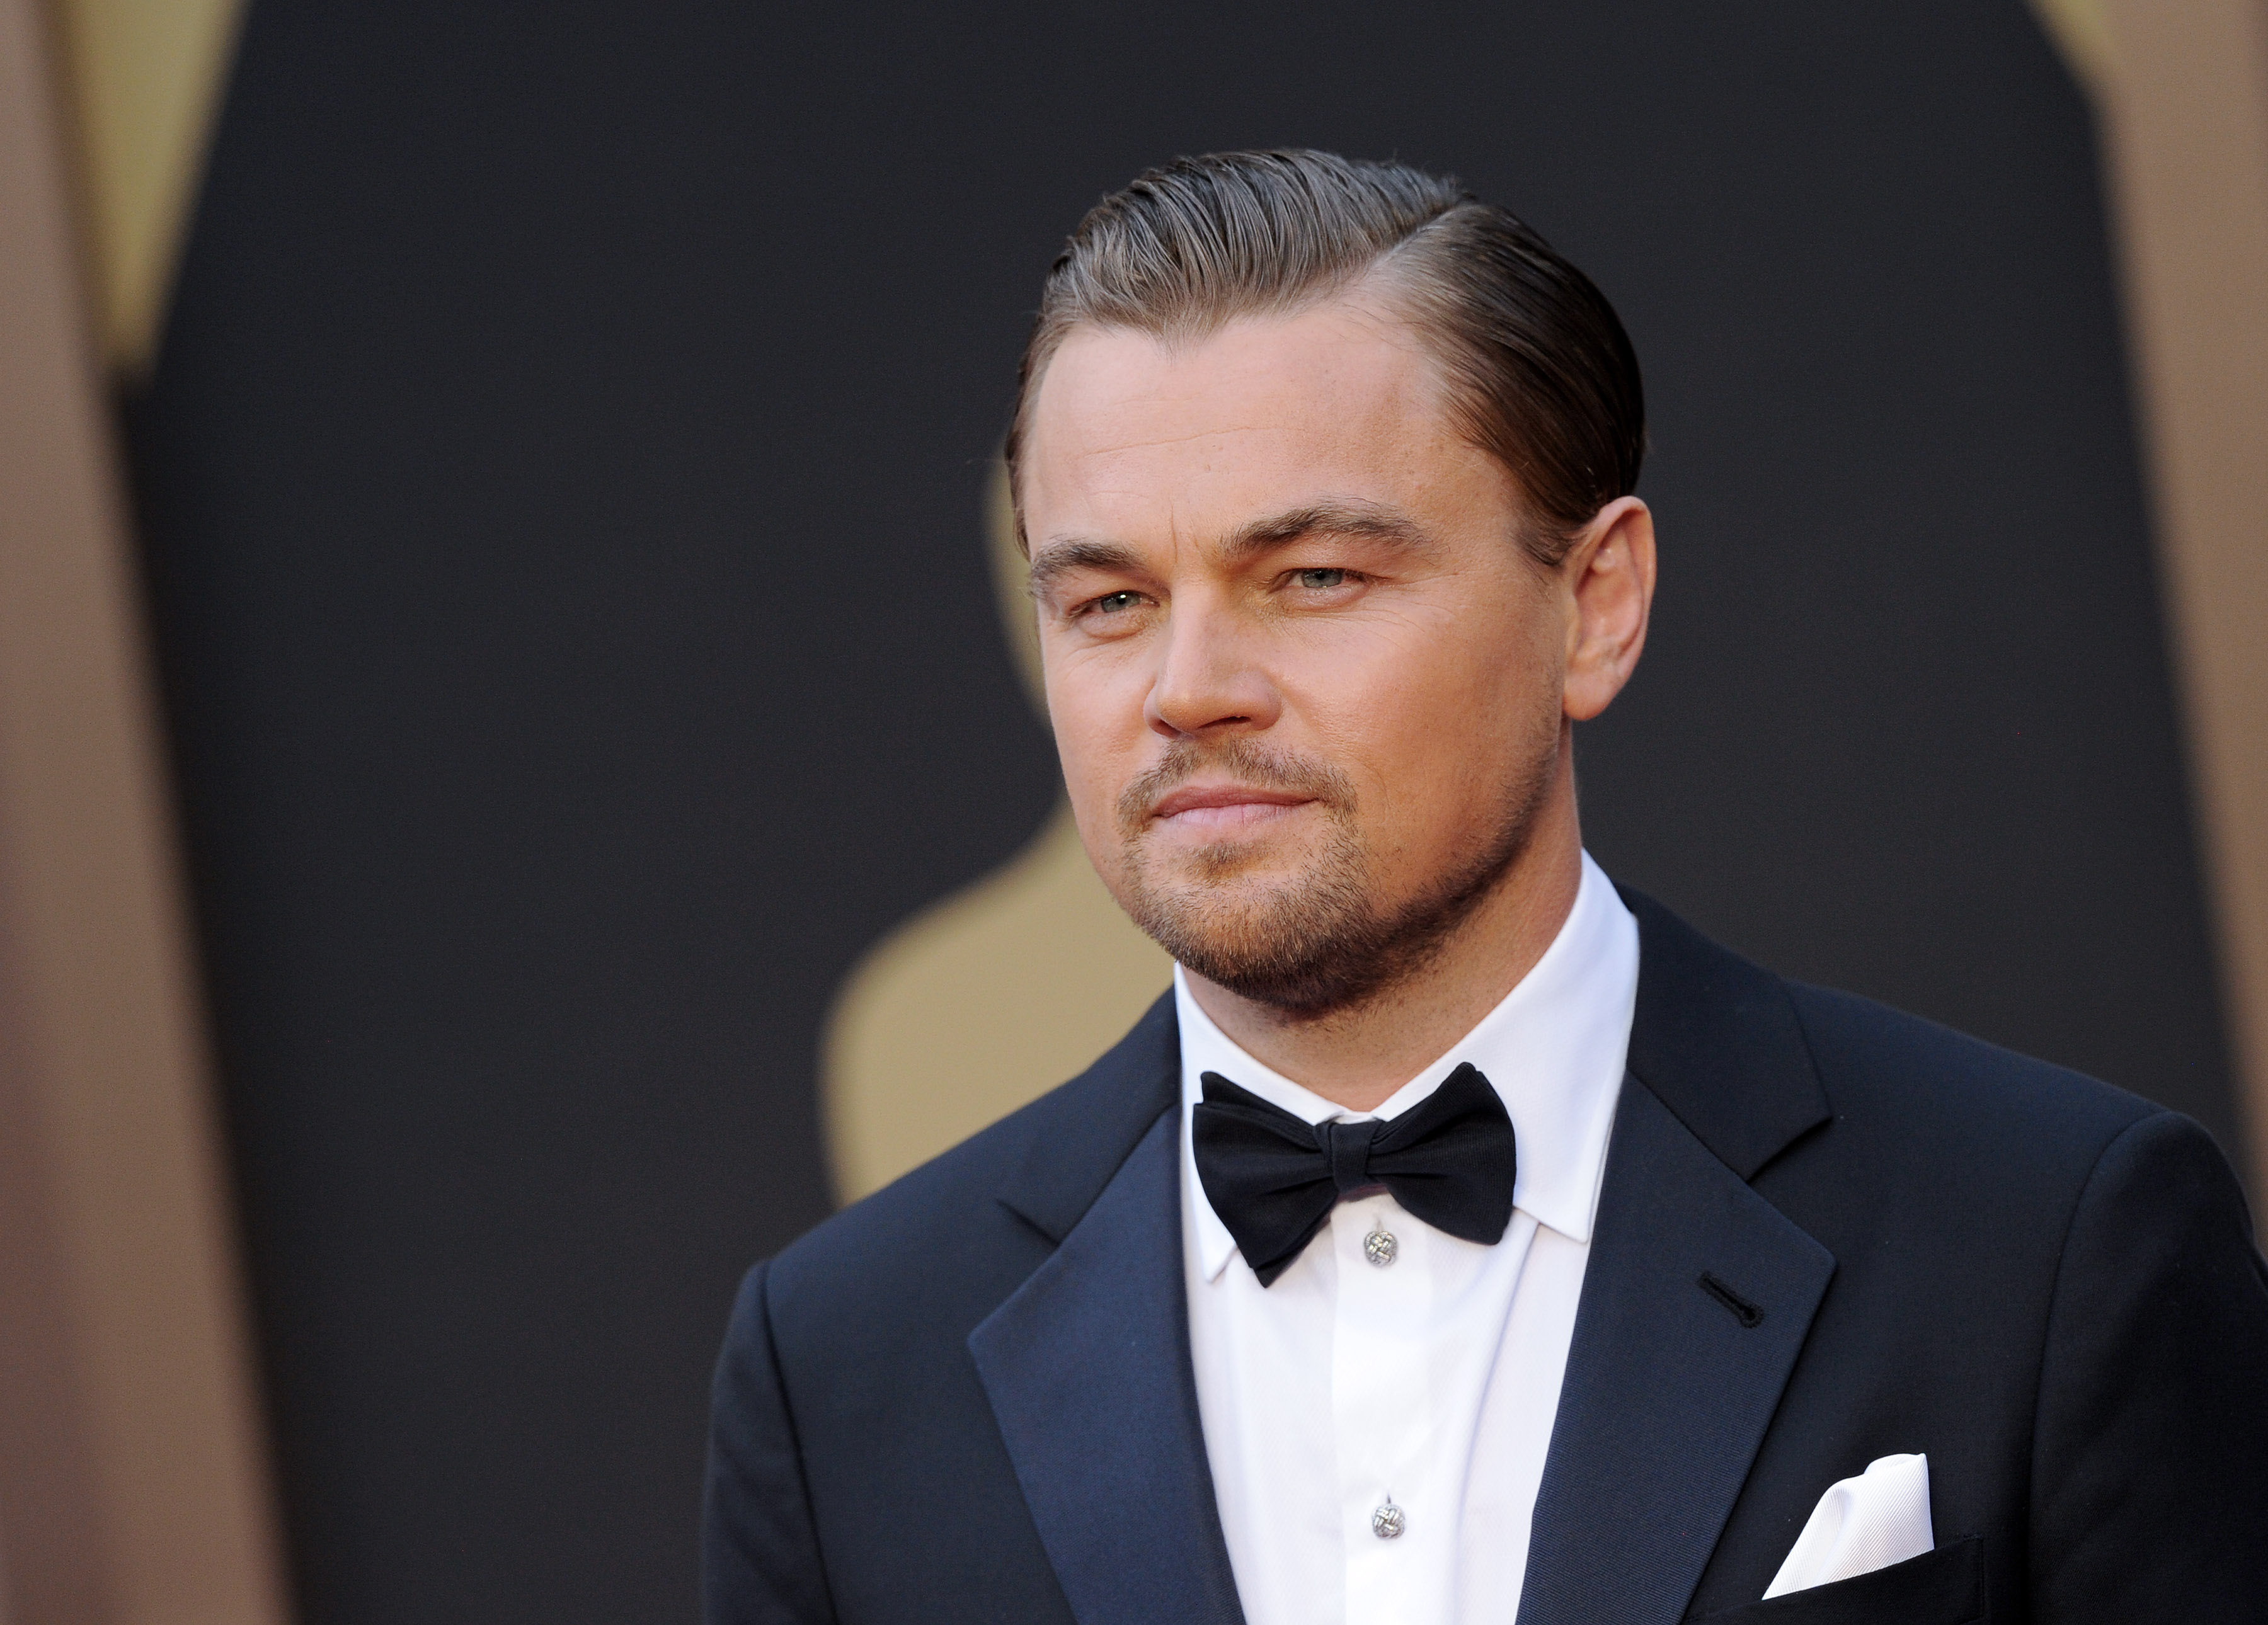 Leonardo DiCaprio arrives at the 86th Annual Academy Awards on March 2, 2014 in Hollywood.